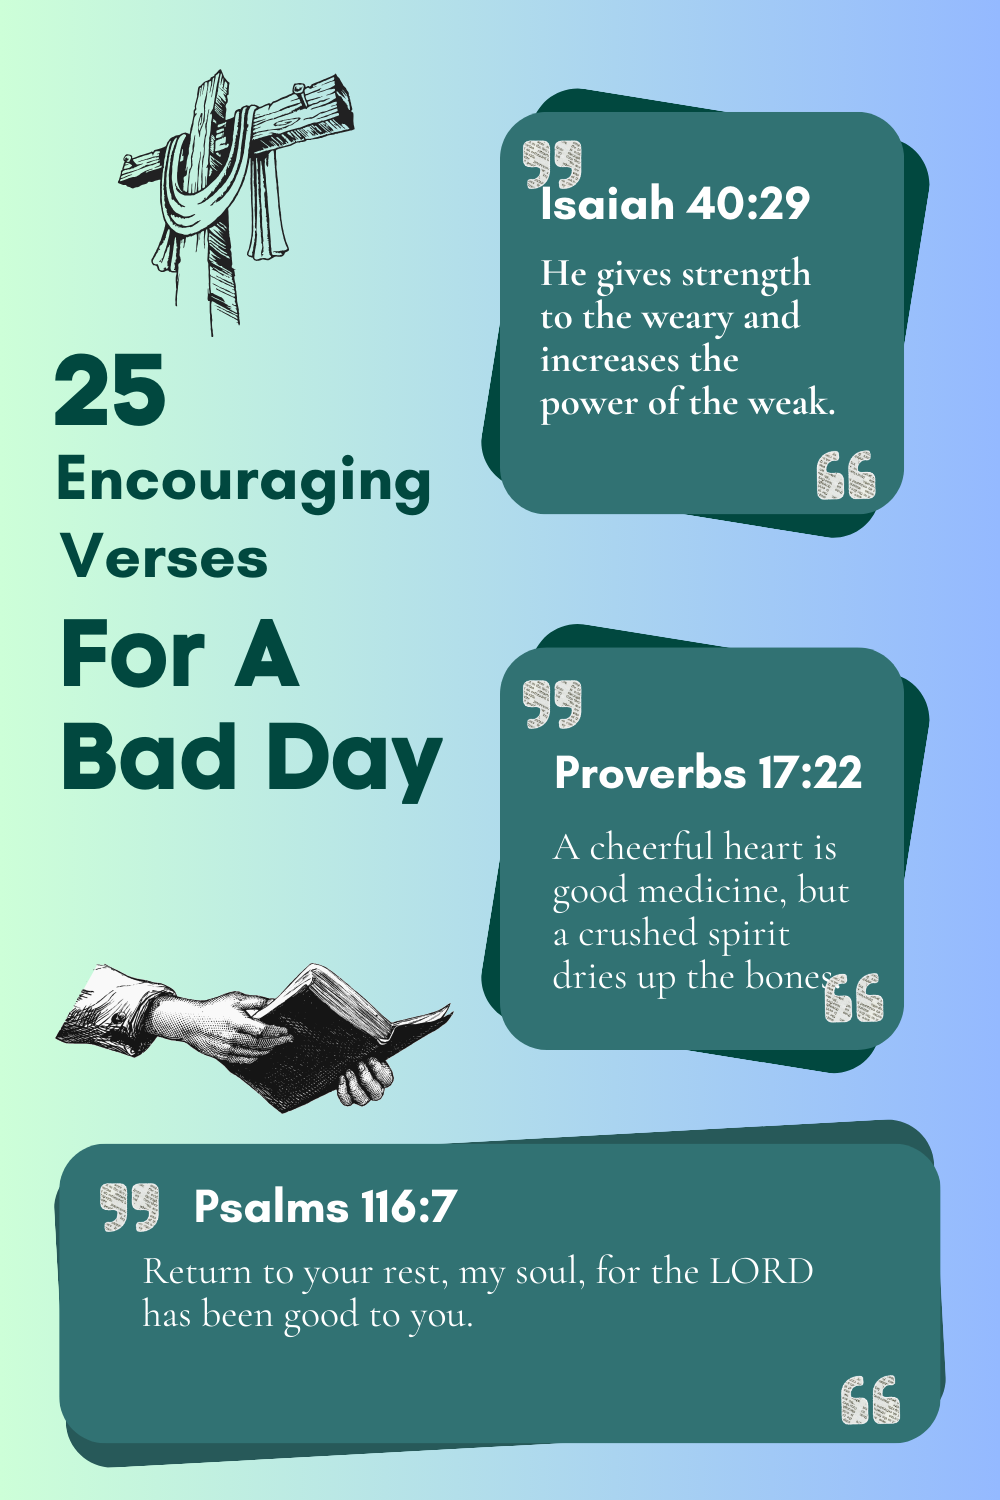 25 Encouraging Verses For A Bad Day